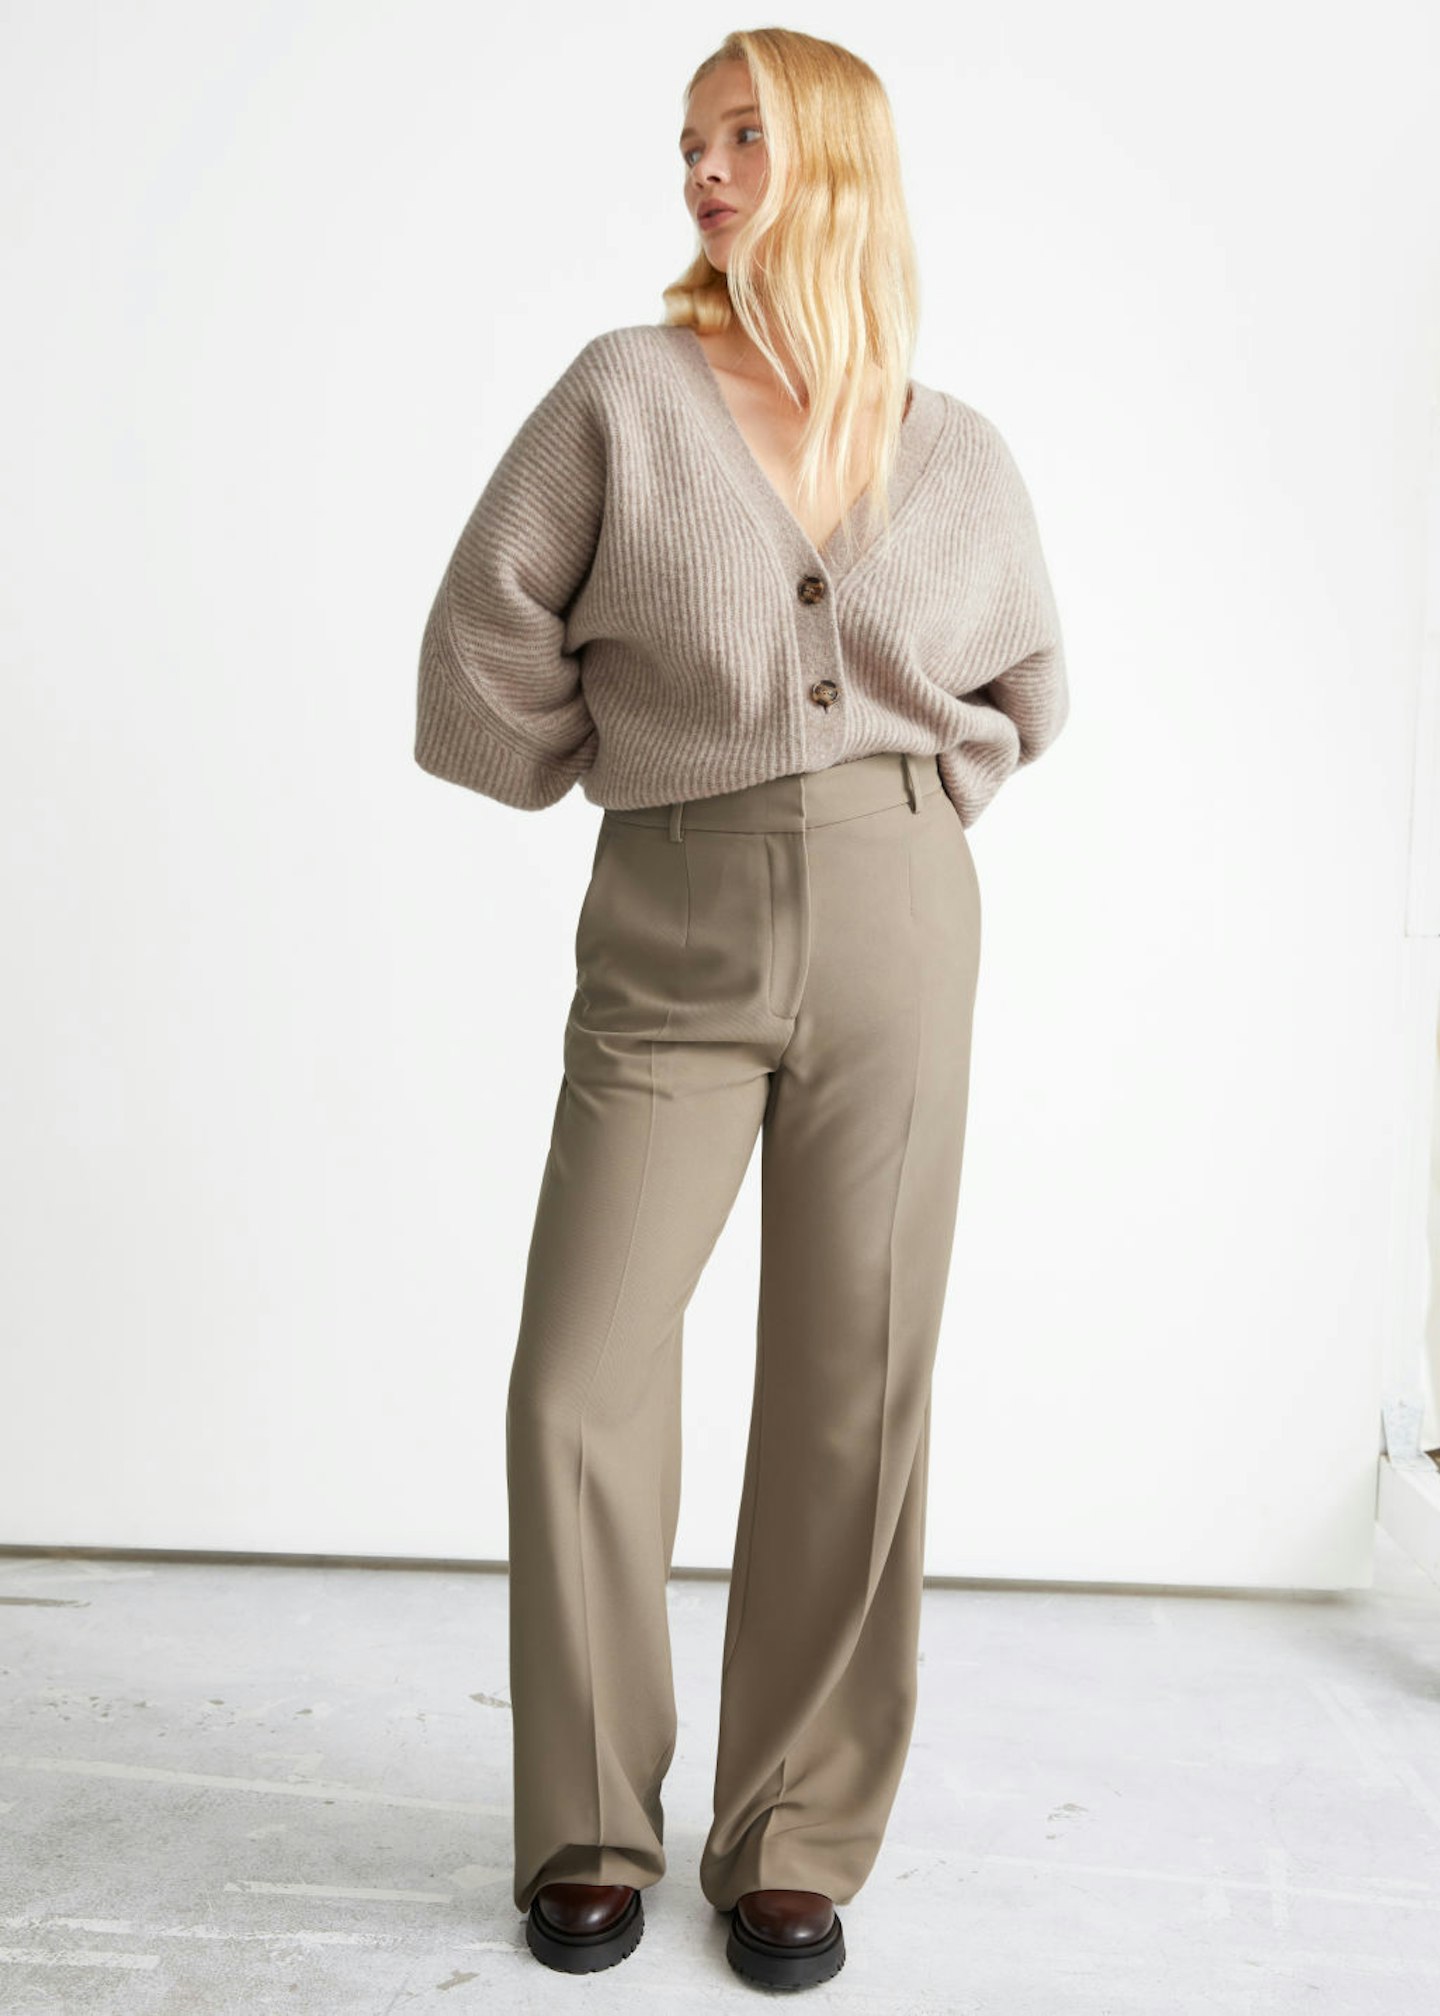 & Other Stories, Wide Flared Trousers, £75